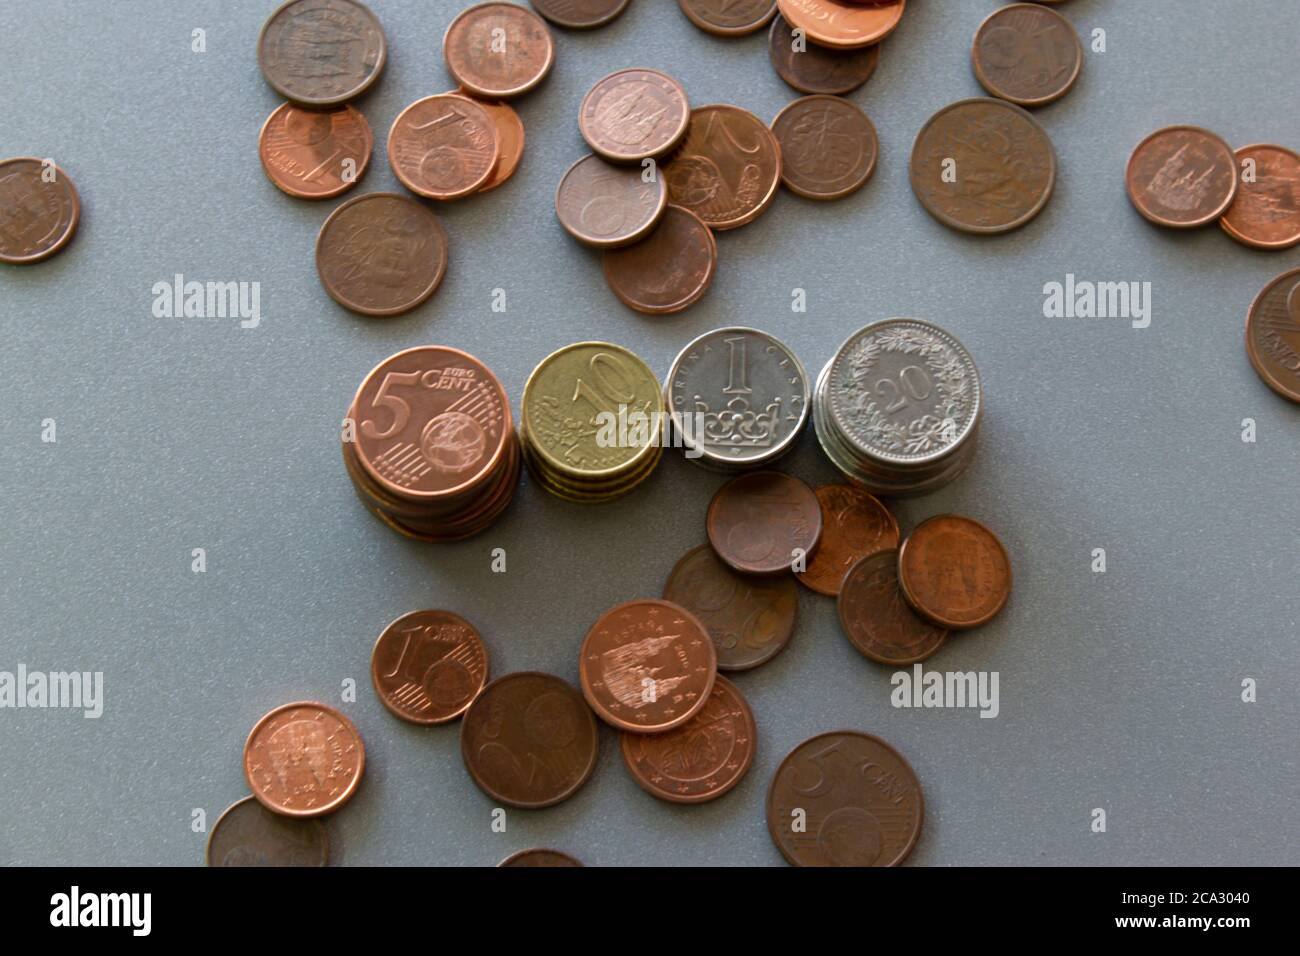 Euro and Europe Coins stacks,diferent sizes and colors.Saving money concept,business and banking. Stock Photo